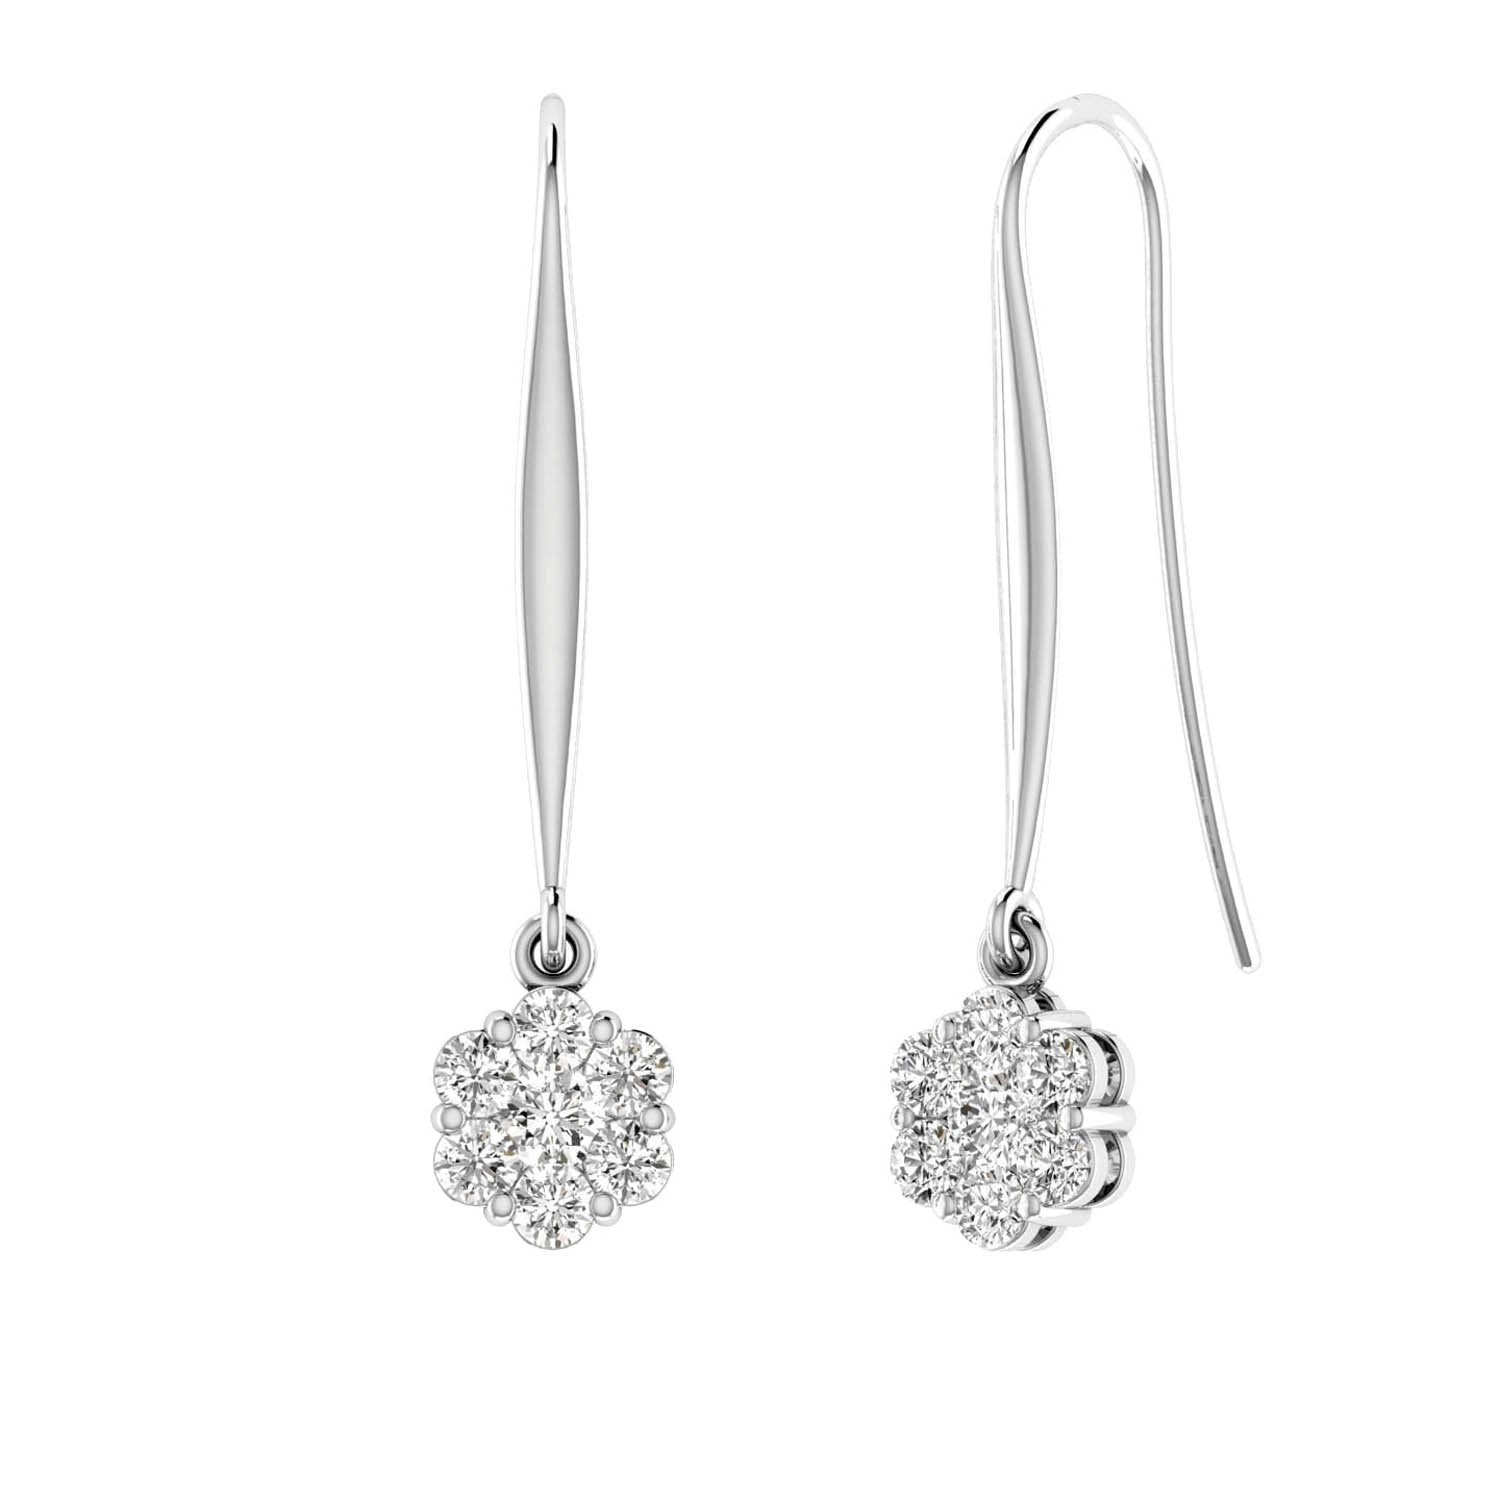 Cluster Hook Diamond Earrings with 0.25ct Diamonds in 9K White Gold - 9WSH25GH